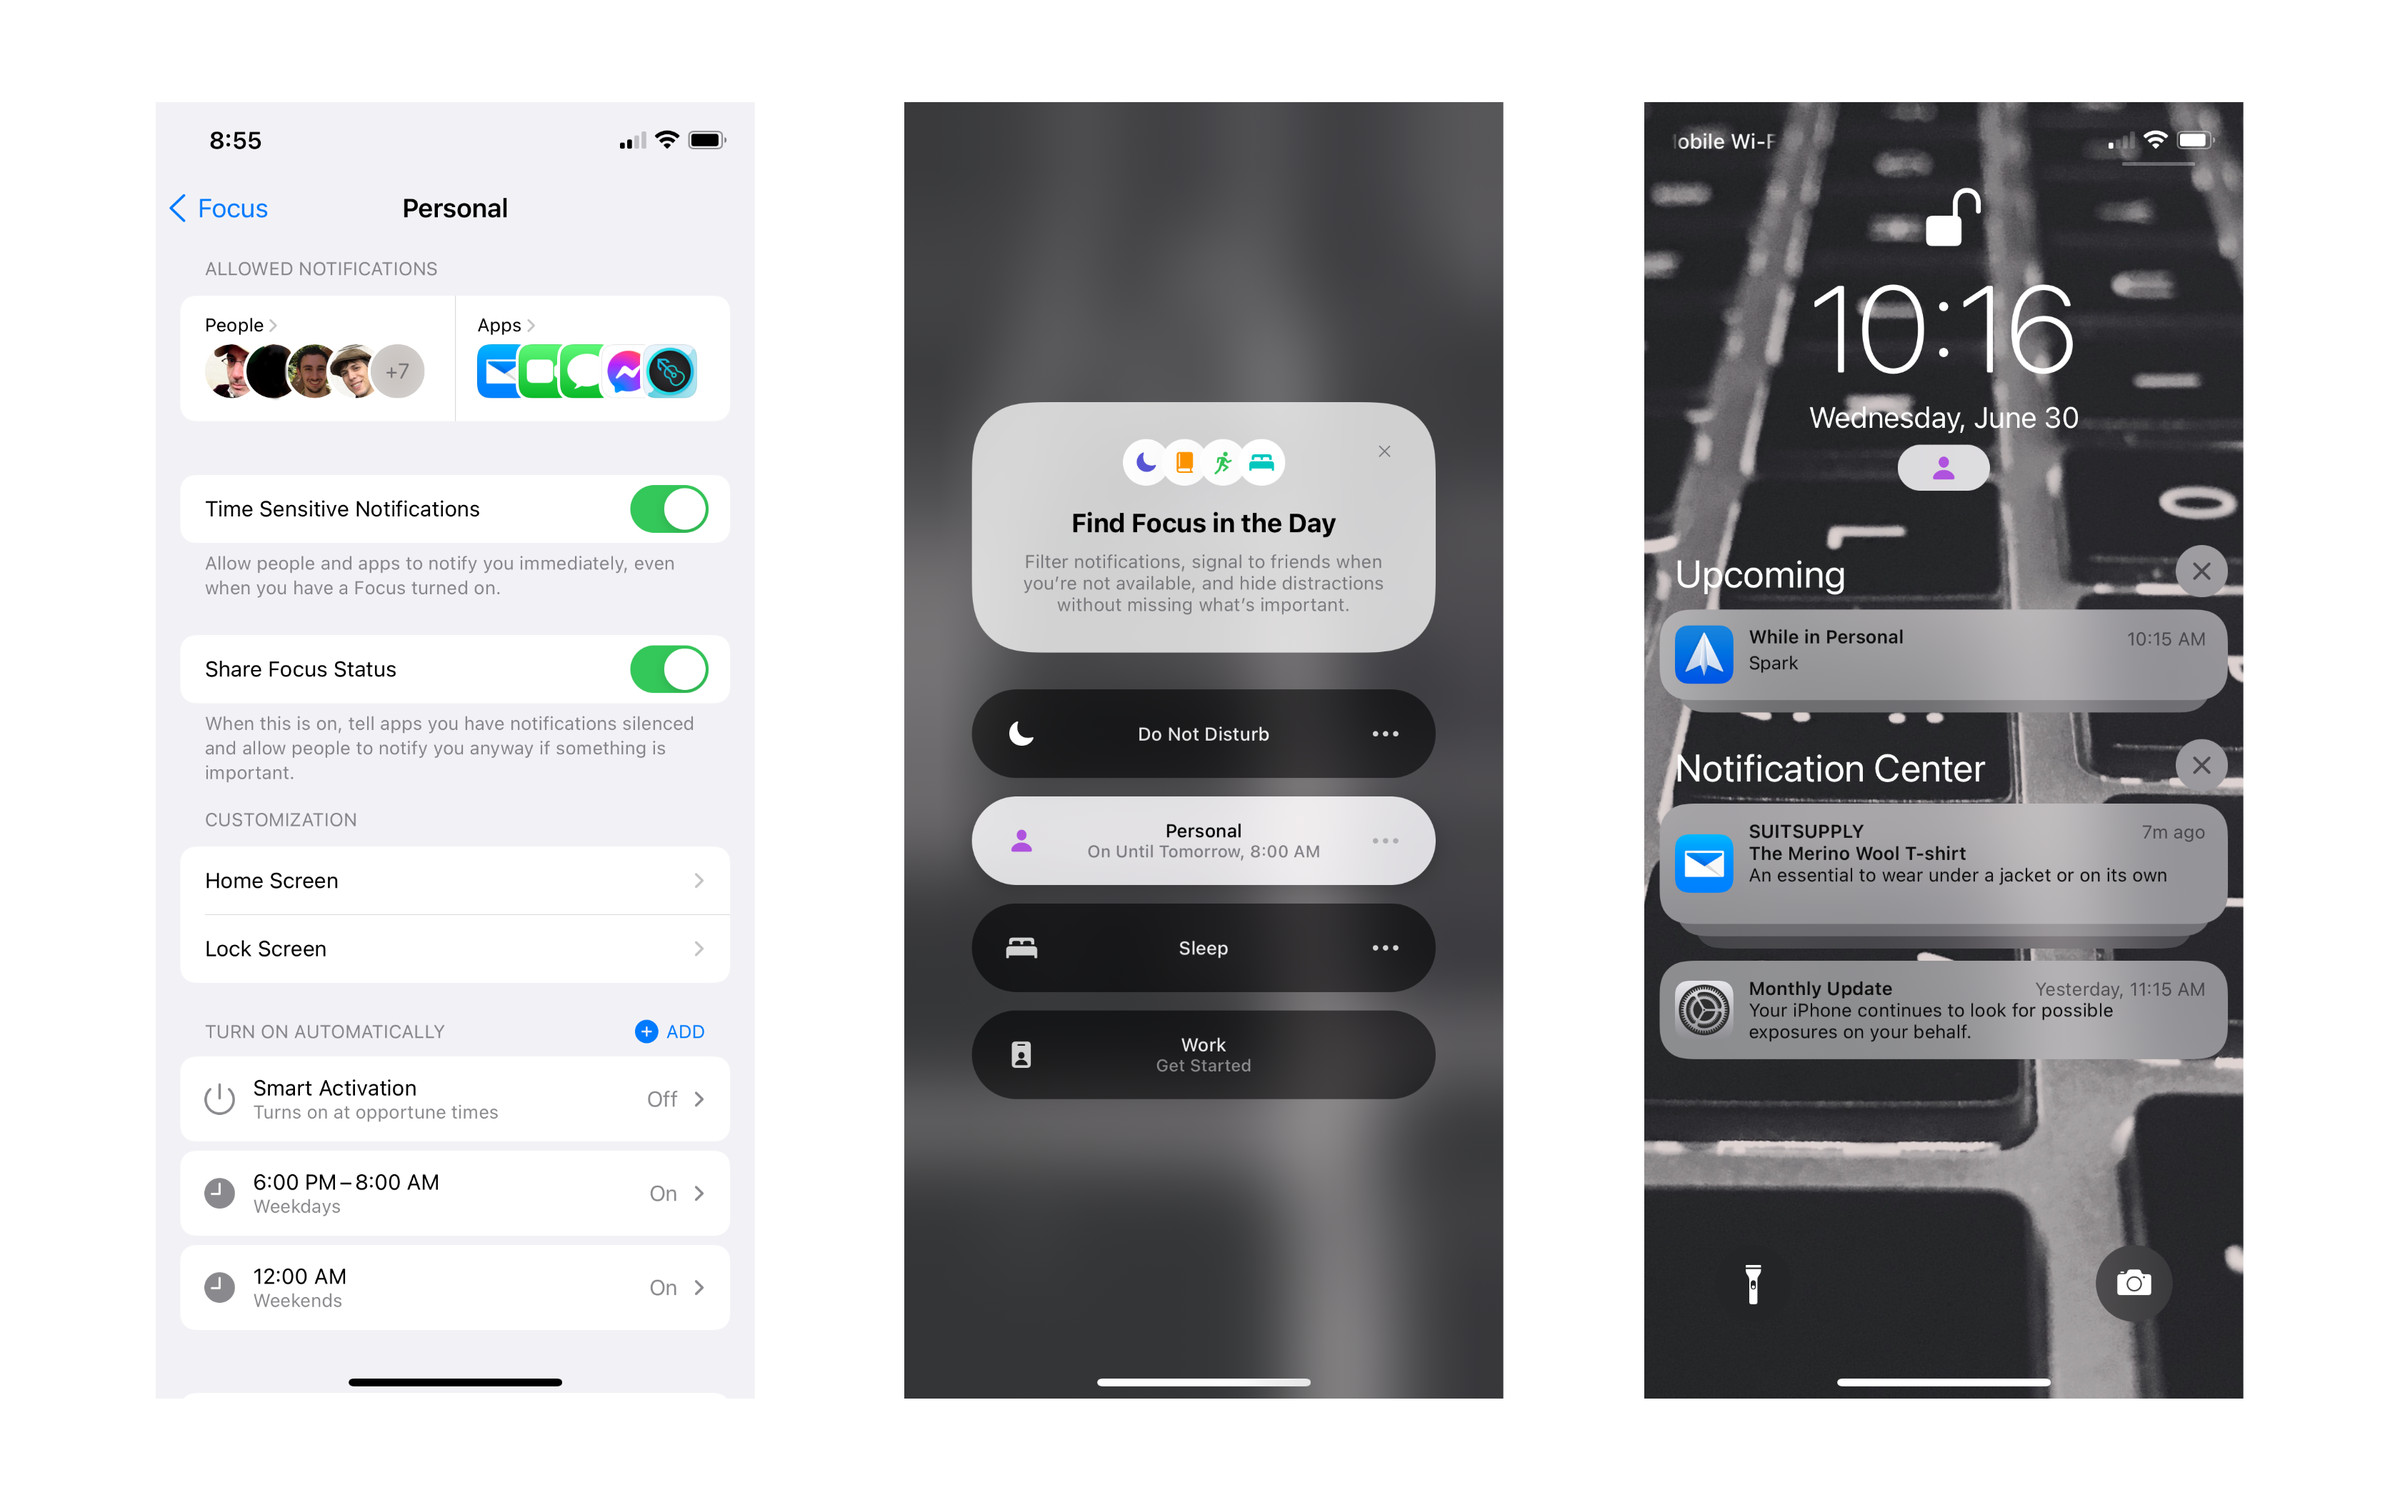 Focus settings (left), the expanded Do Not Disturb menu (middle), and Focus-siloed notifications (right).